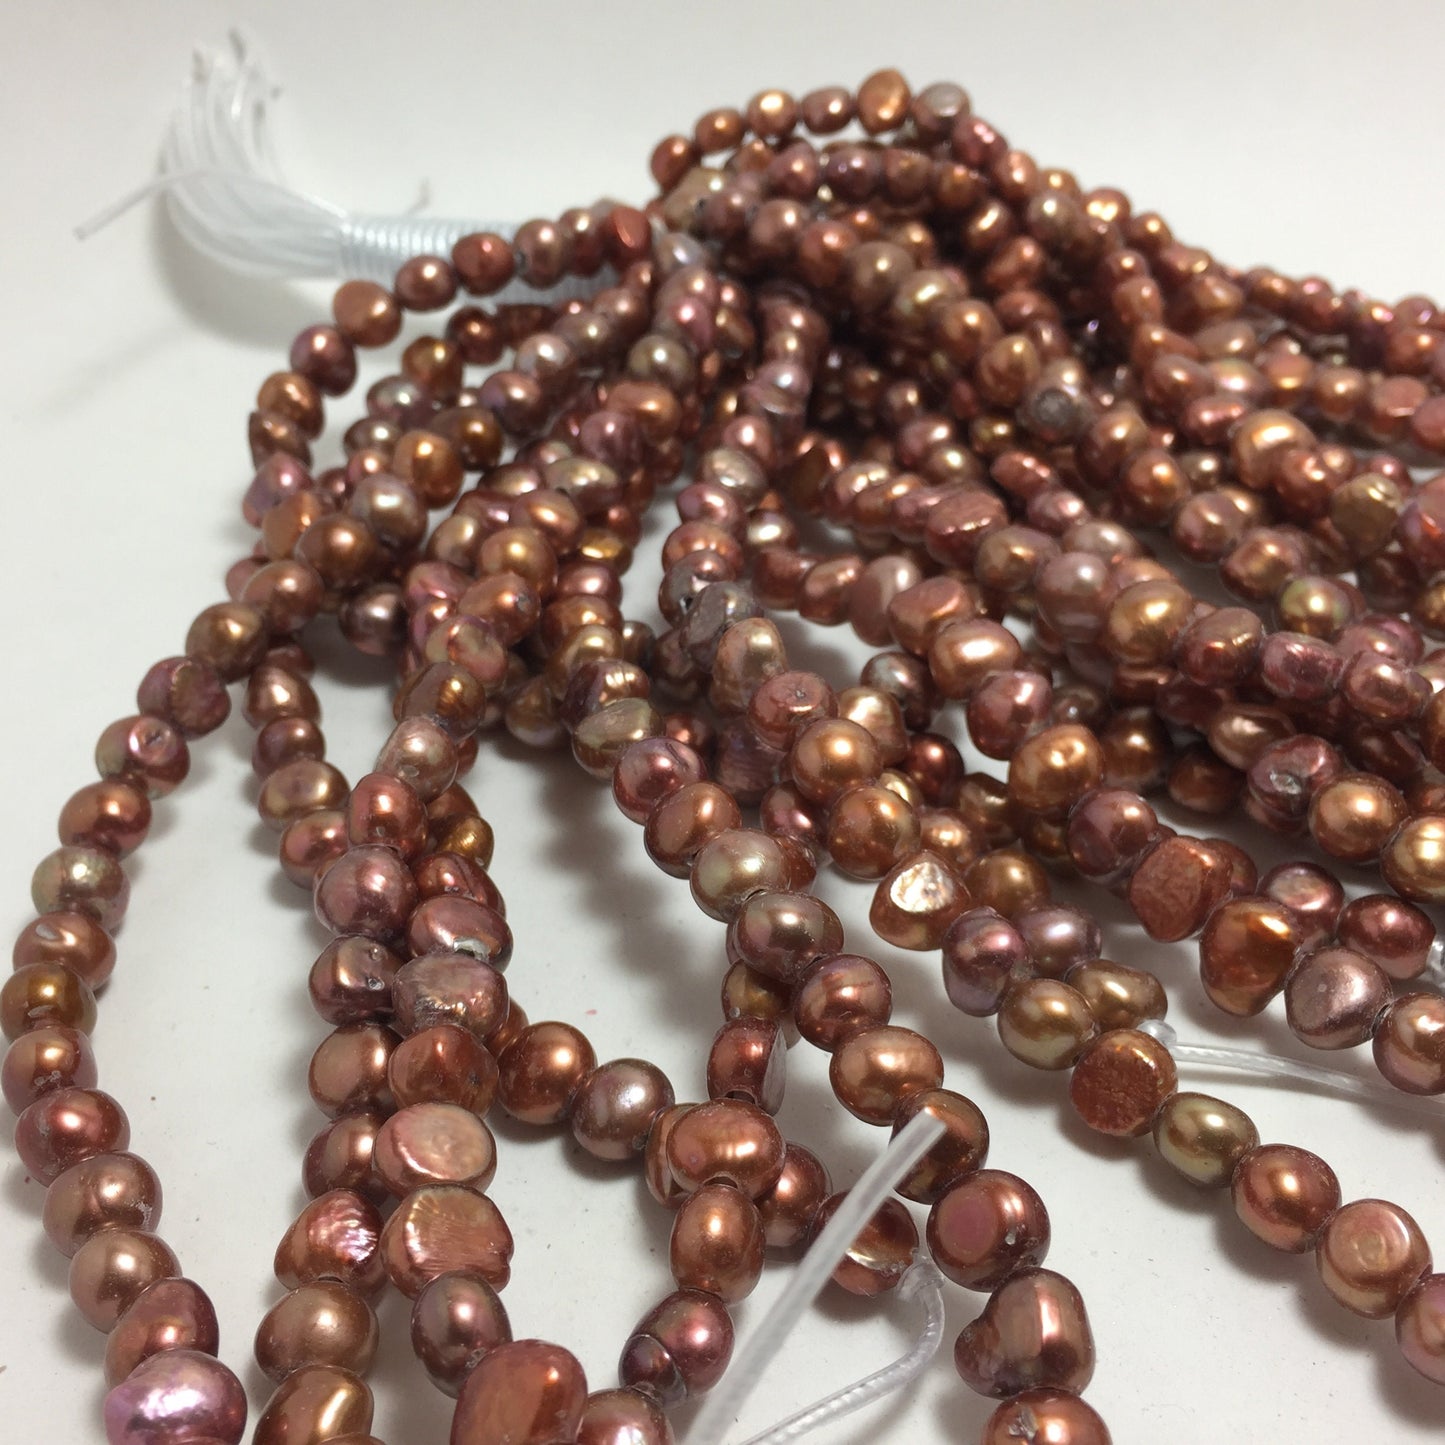 Large Hole Pearls, 7.5-8.5mm Nugget Rice Shape, Copper Color Freshwater Pearls, 8 inch strand with 2.5mm Hole Size, LH074